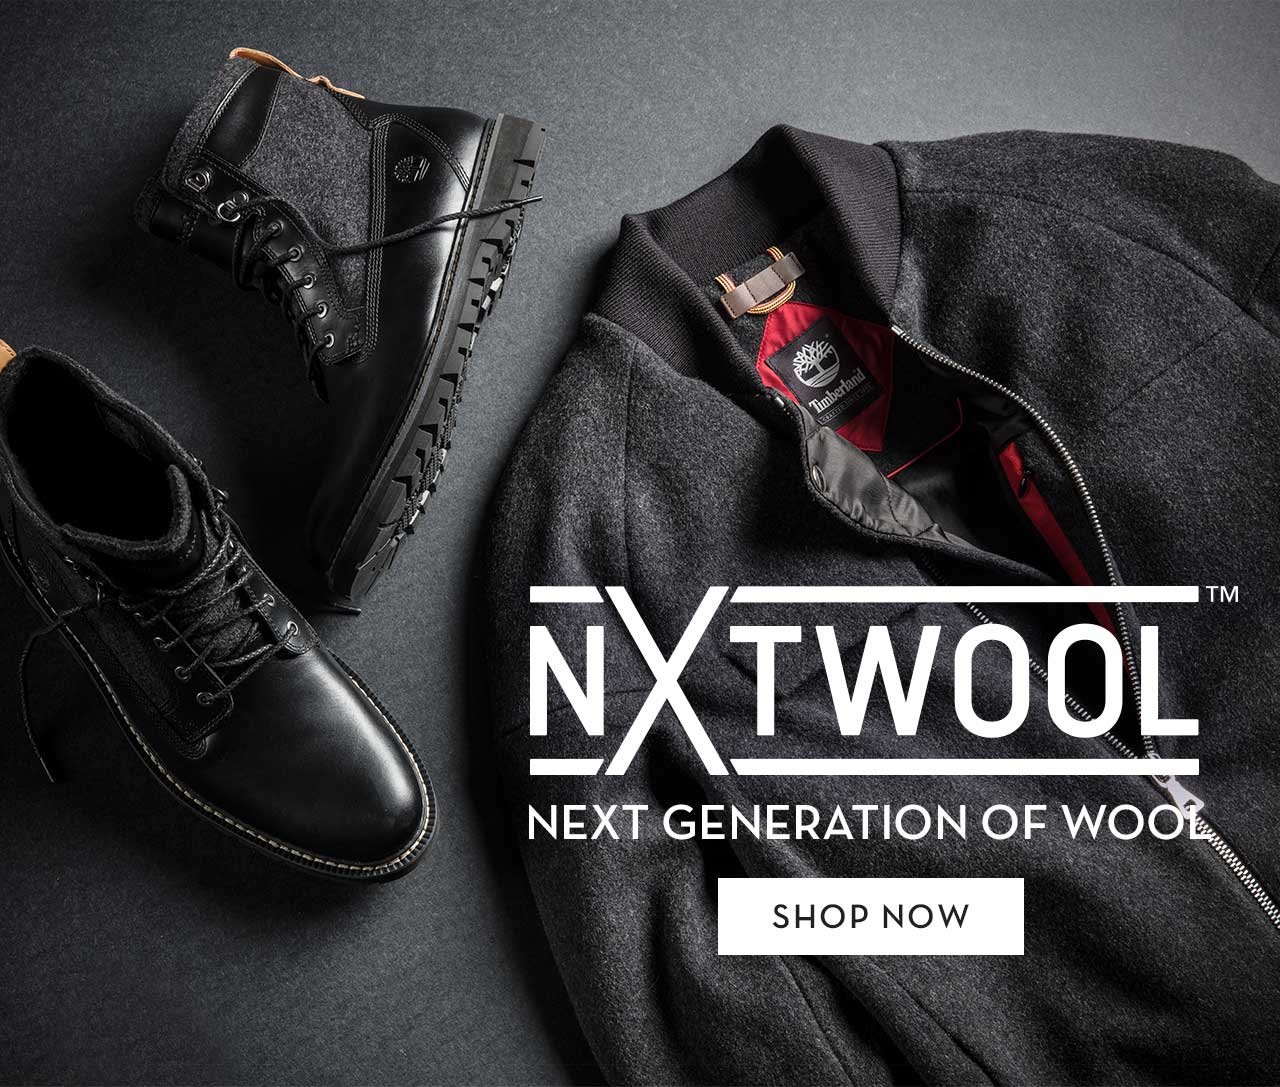 Timberland: The NXT Generation of Wool 